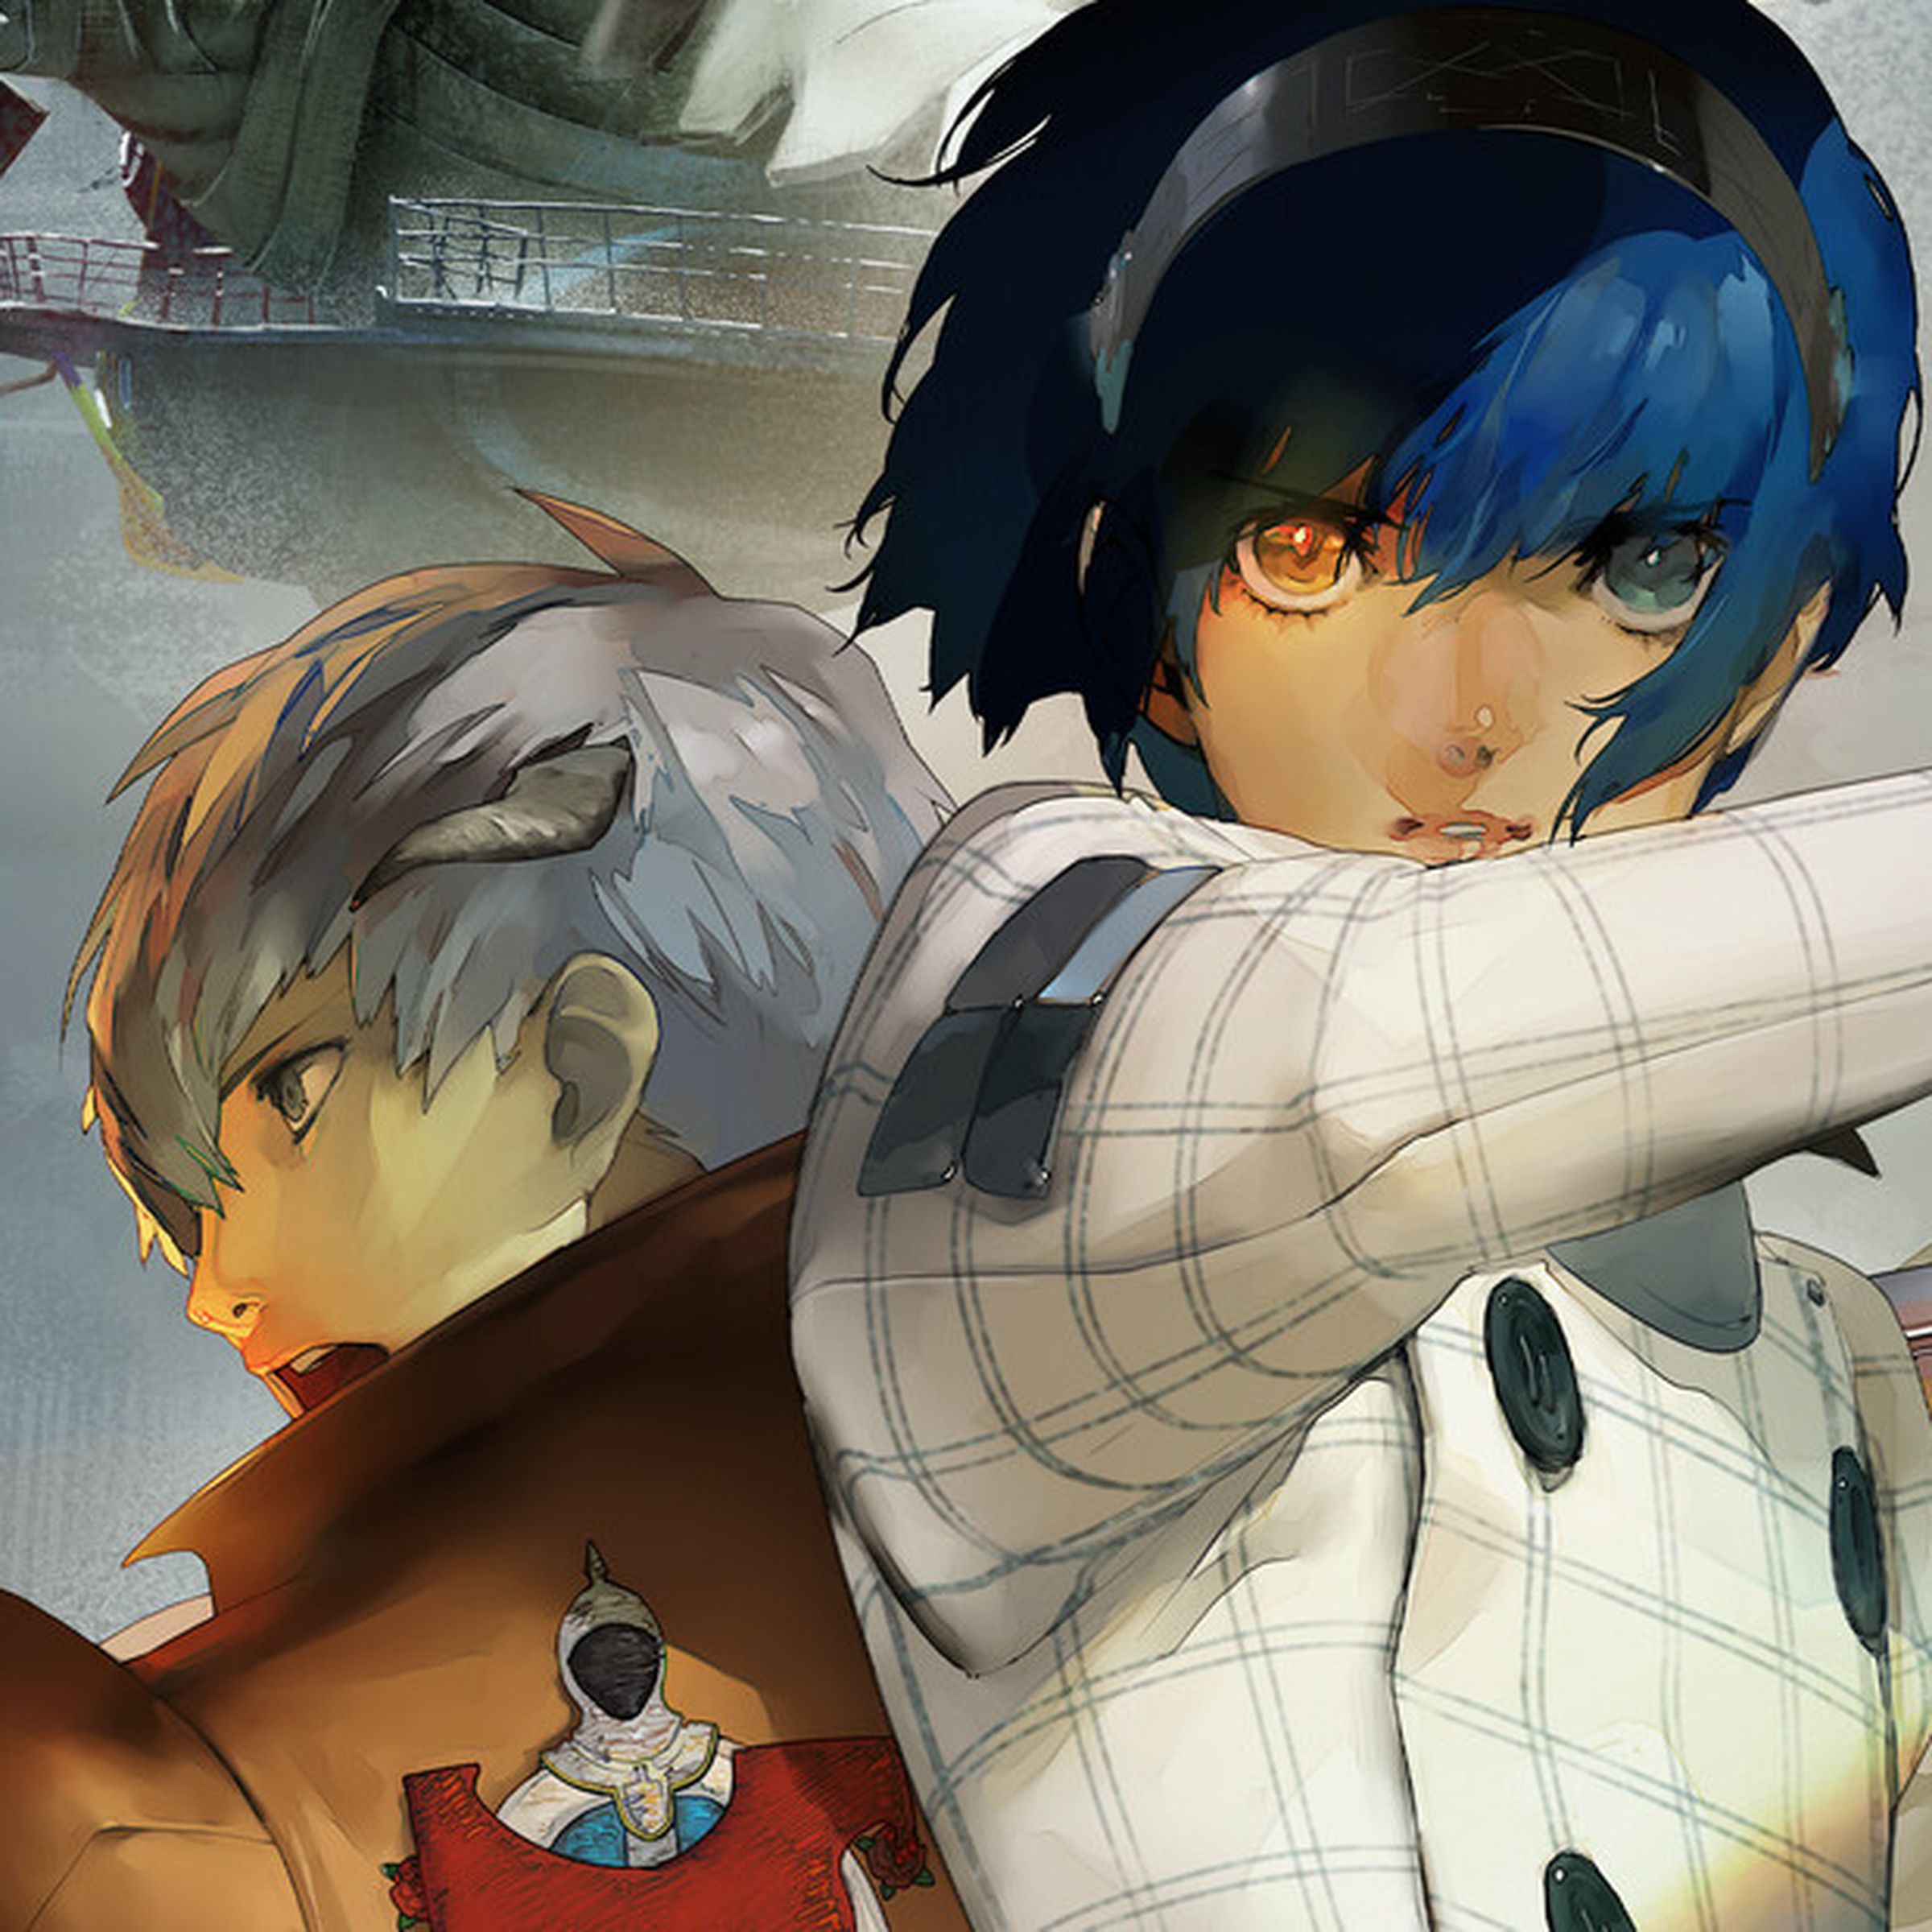 Key Art from Metaphor: ReFantazio featuring the main character with blue hair and dual-colored eyes and a party member with silver hair.